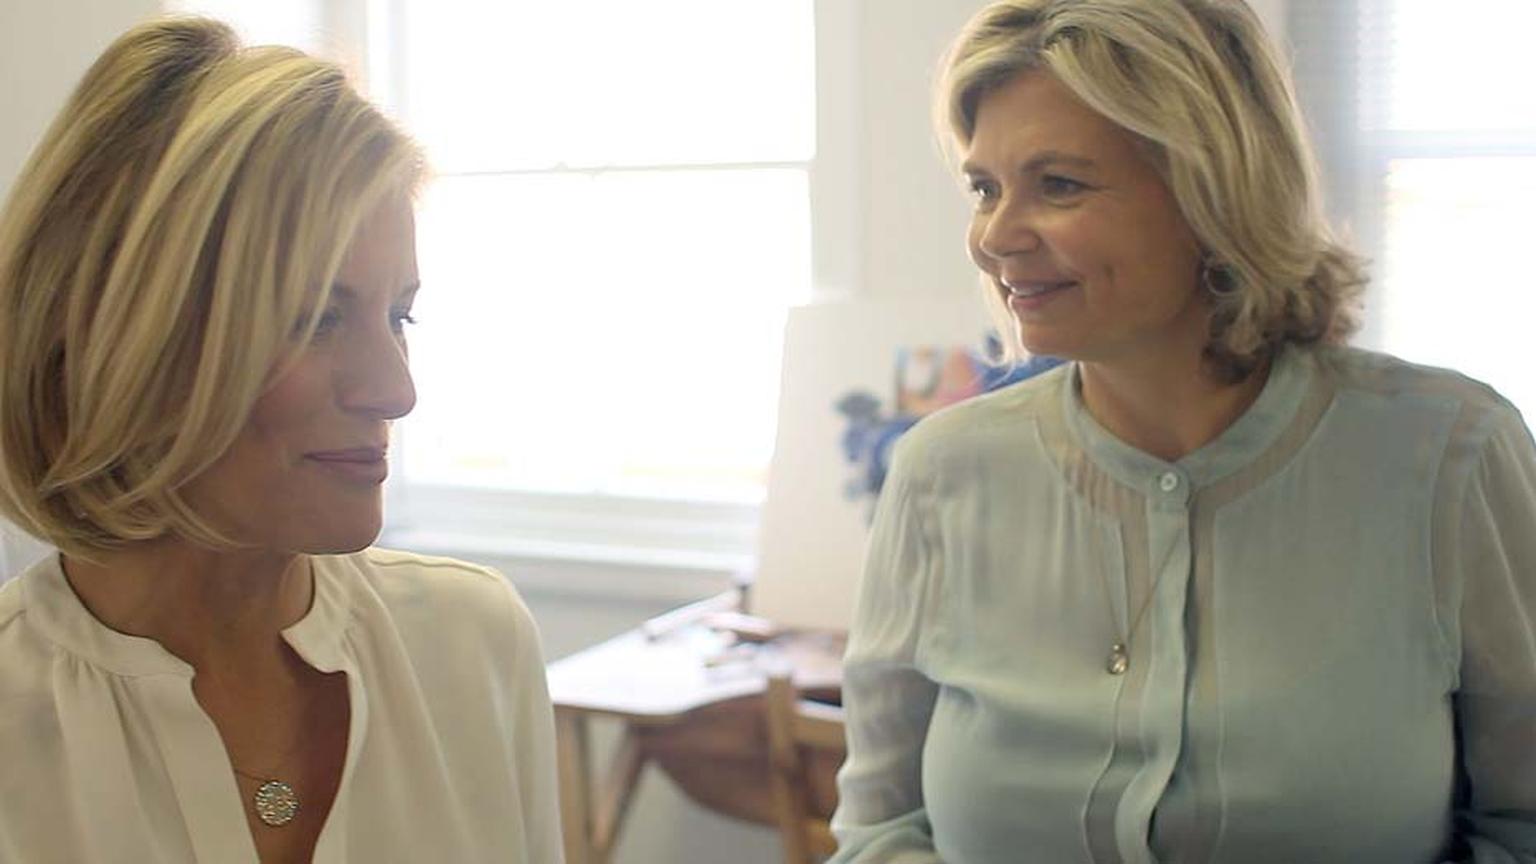 Bec Astley Clarke and Maria Doulton chat in the Astley Clarke design studio, which is located in a quintessentially London mews.